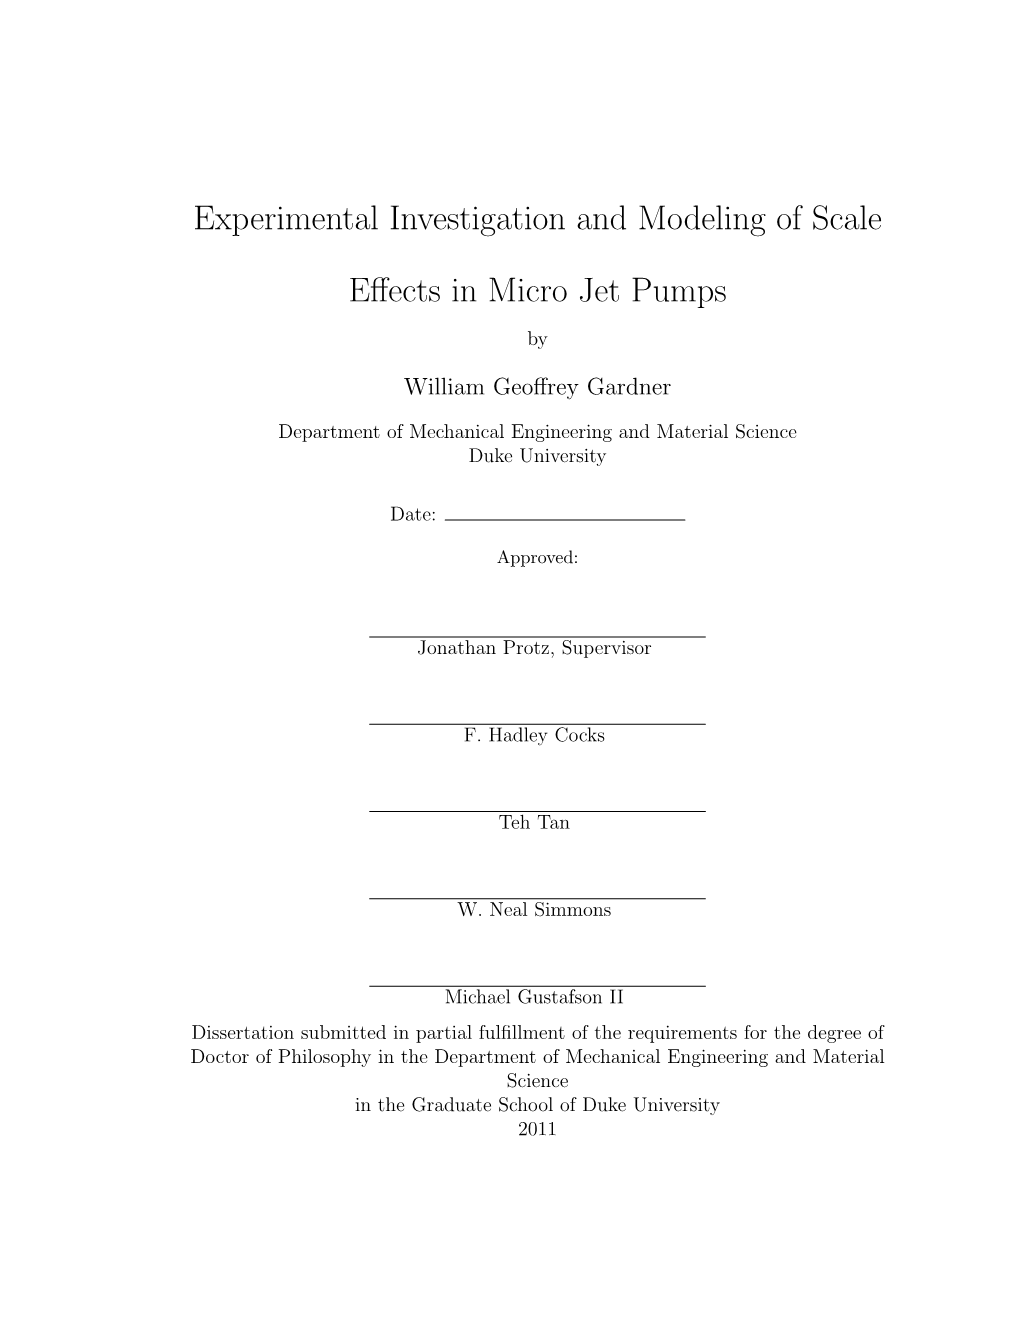 Experimental Investigation and Modeling of Scale Effects in Micro